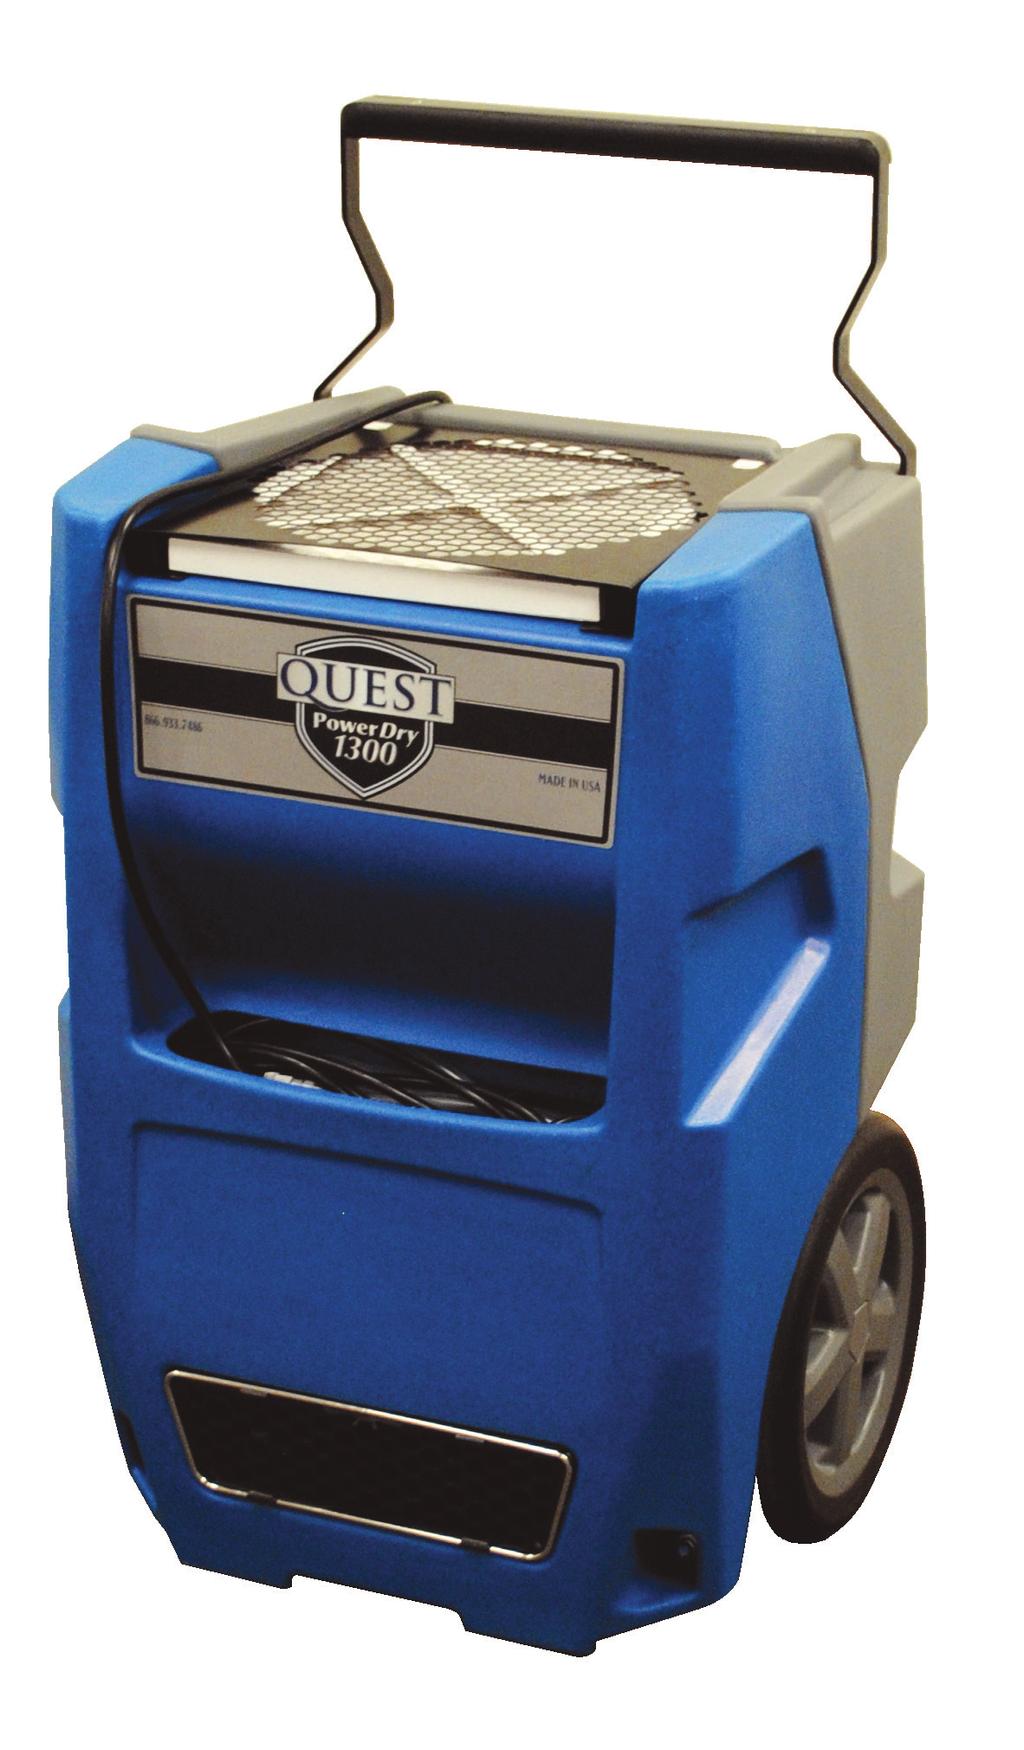 DRY 150 Quest PowerDry 1300 Read and Save These Instructions This manual is provided to acquaint you with the dehumidifier so that installation,